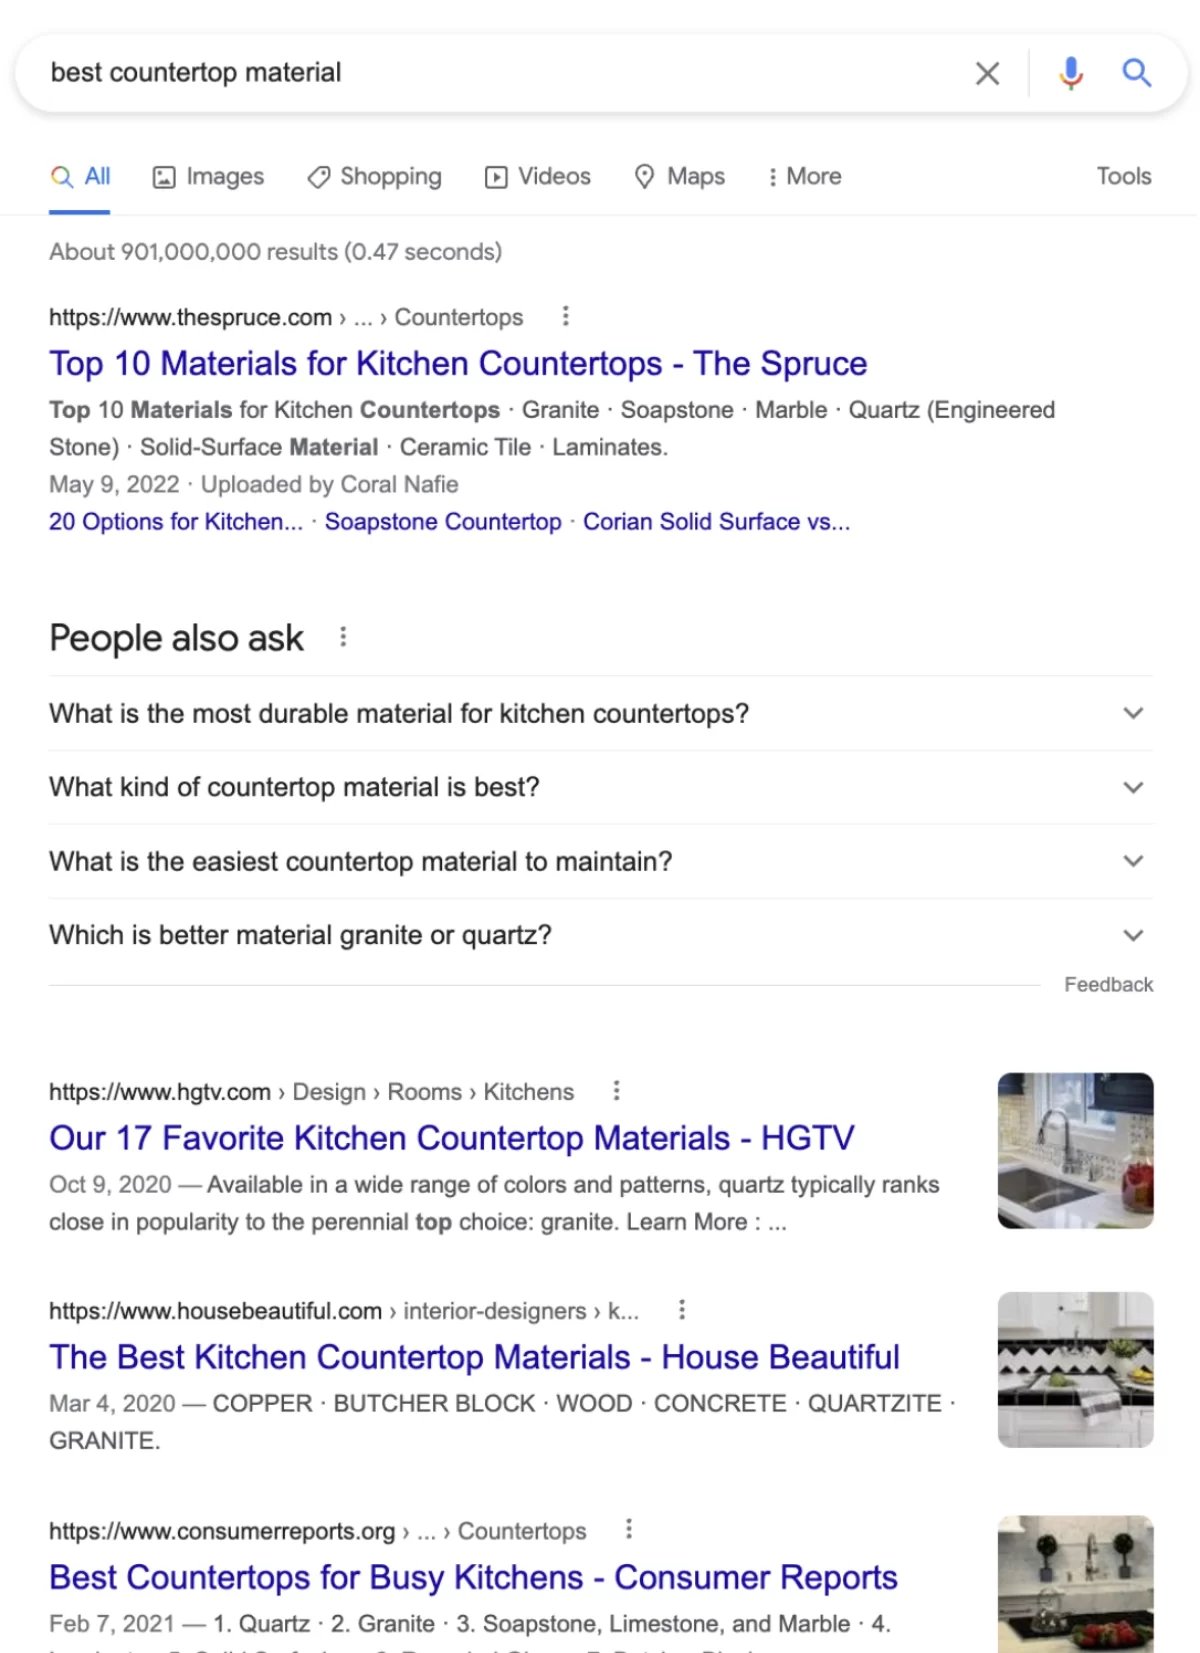 serp-with-articles